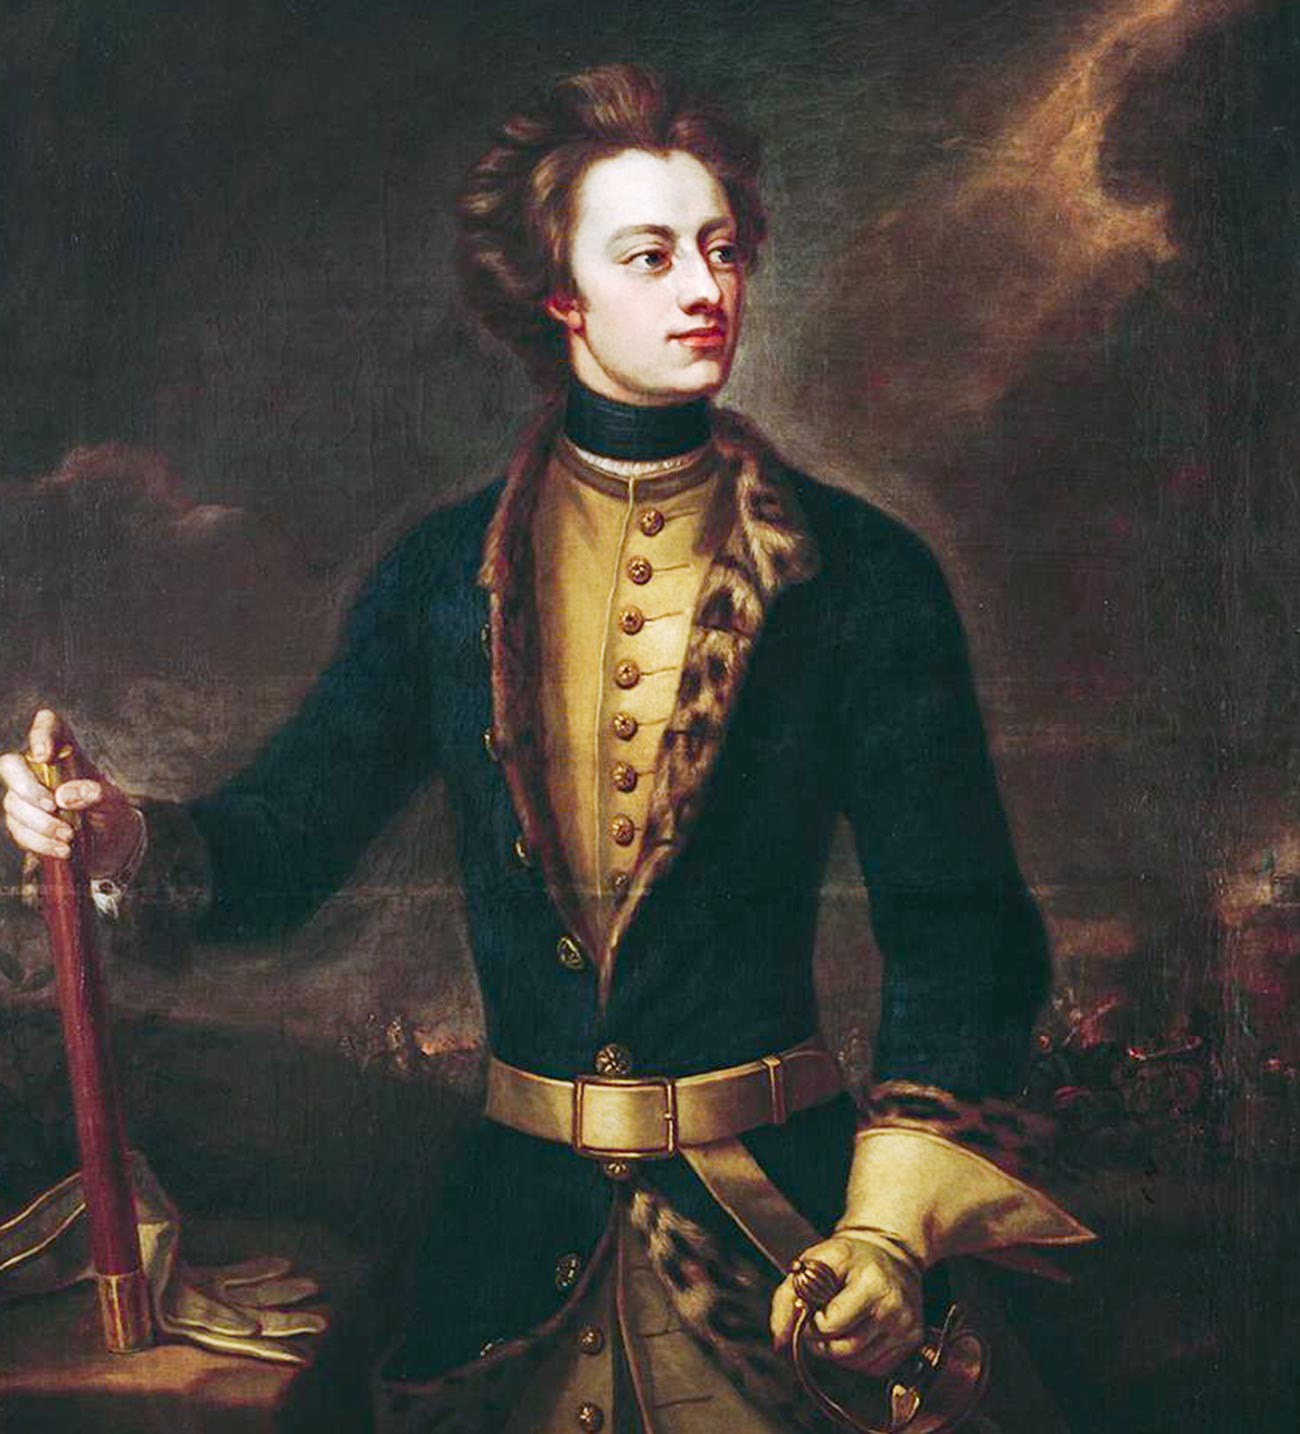 King Charles XII of Sweden.